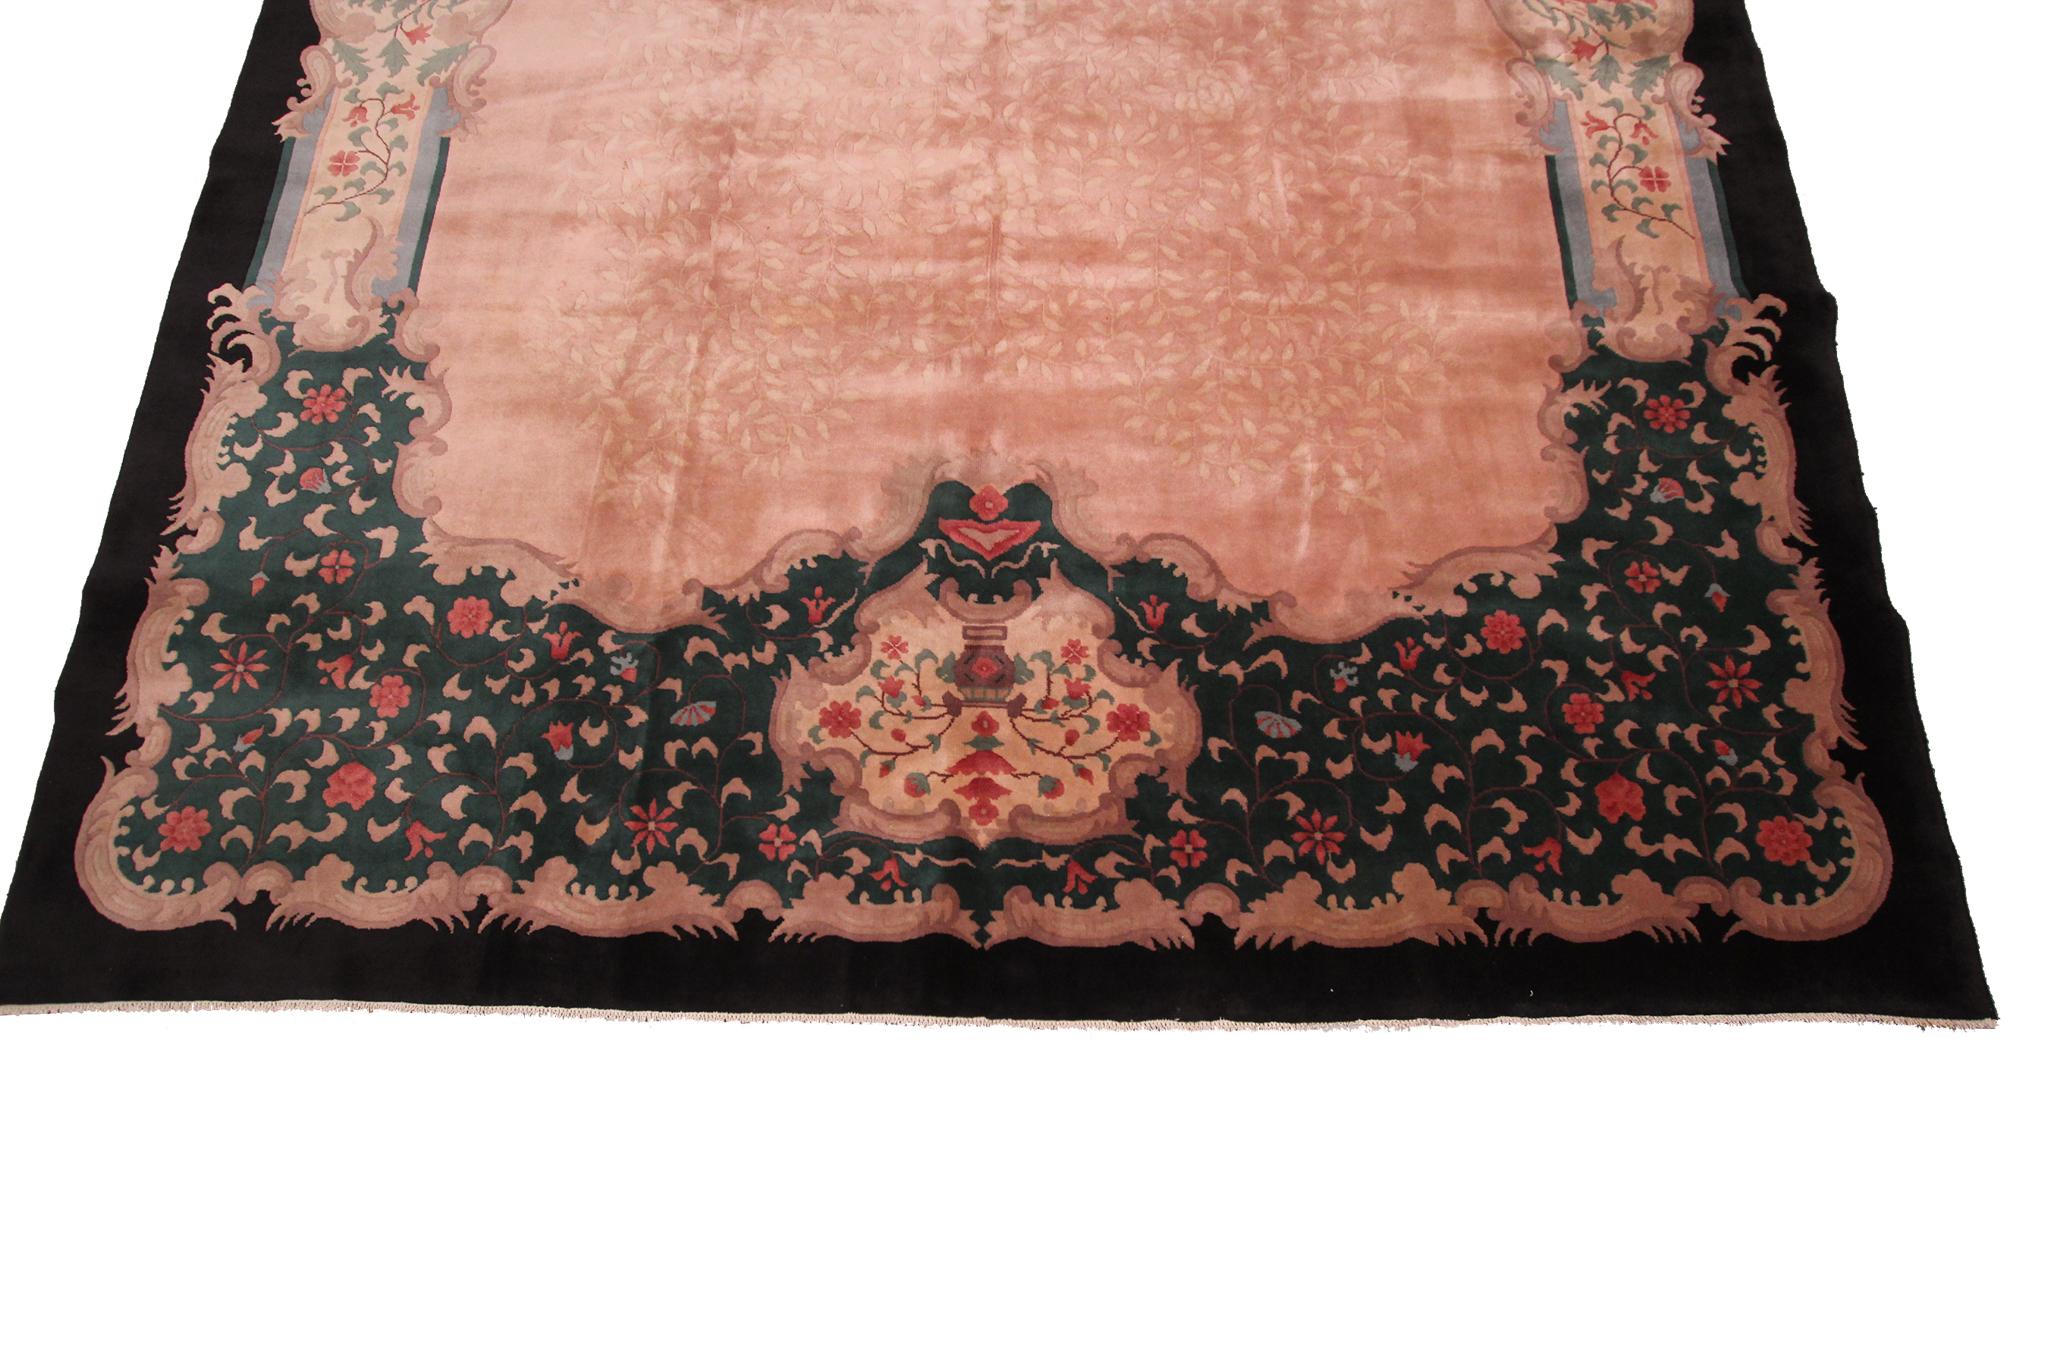 Vintage Art Deco Rug Handmade Chinese Rug Pink Wool Carpet 269cm x 351cm 9x12 In Excellent Condition For Sale In New York, NY